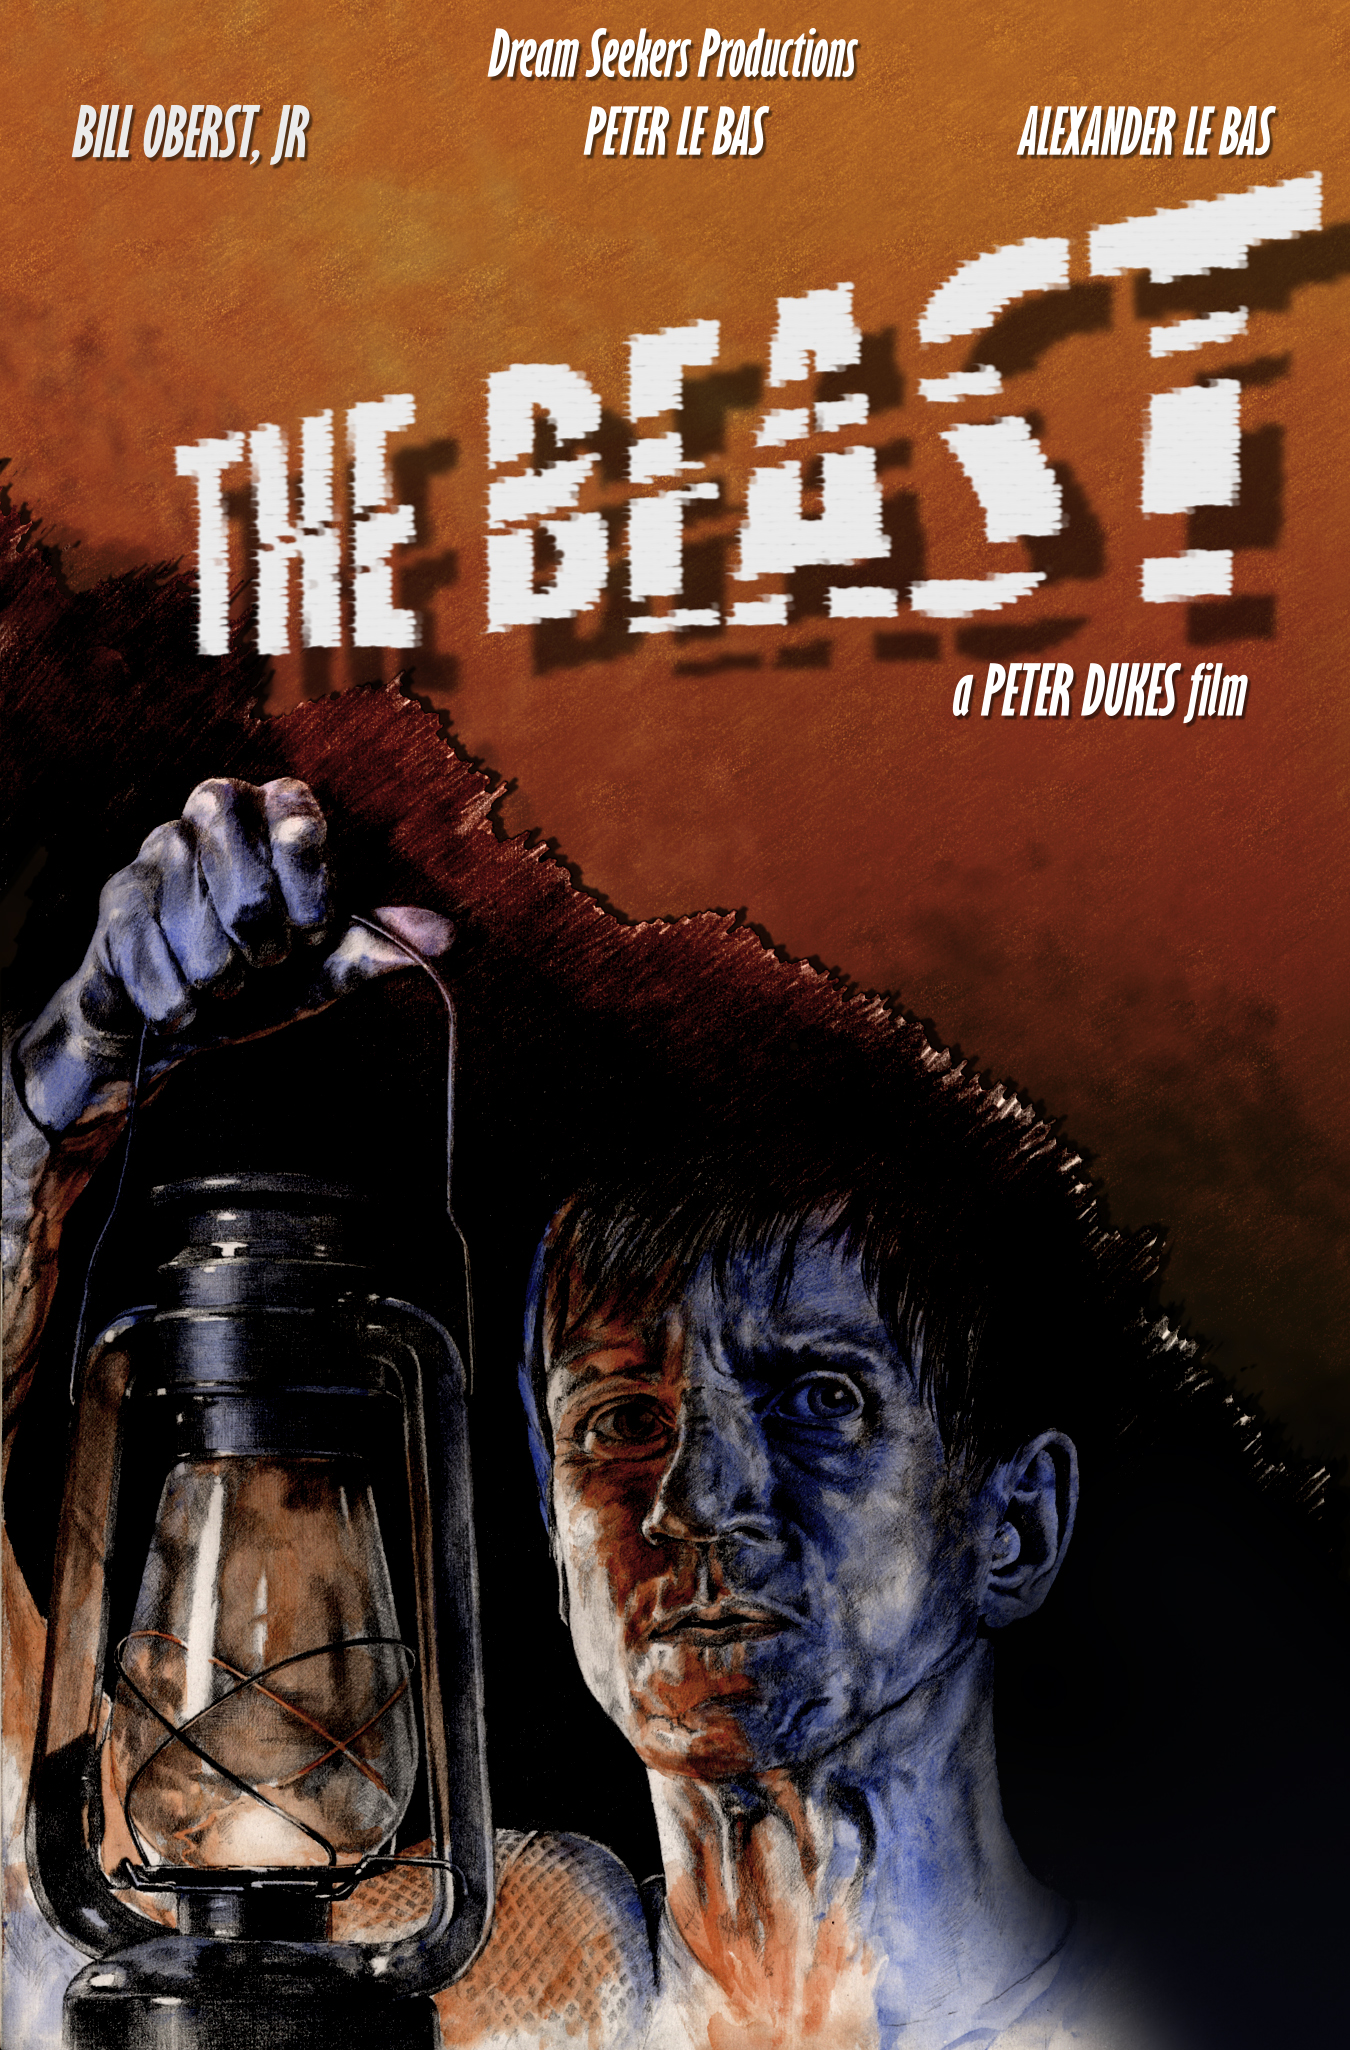 Bill Oberst Jr. poster for THE BEAST, writer/director Peter Dukes' homage to classic horror